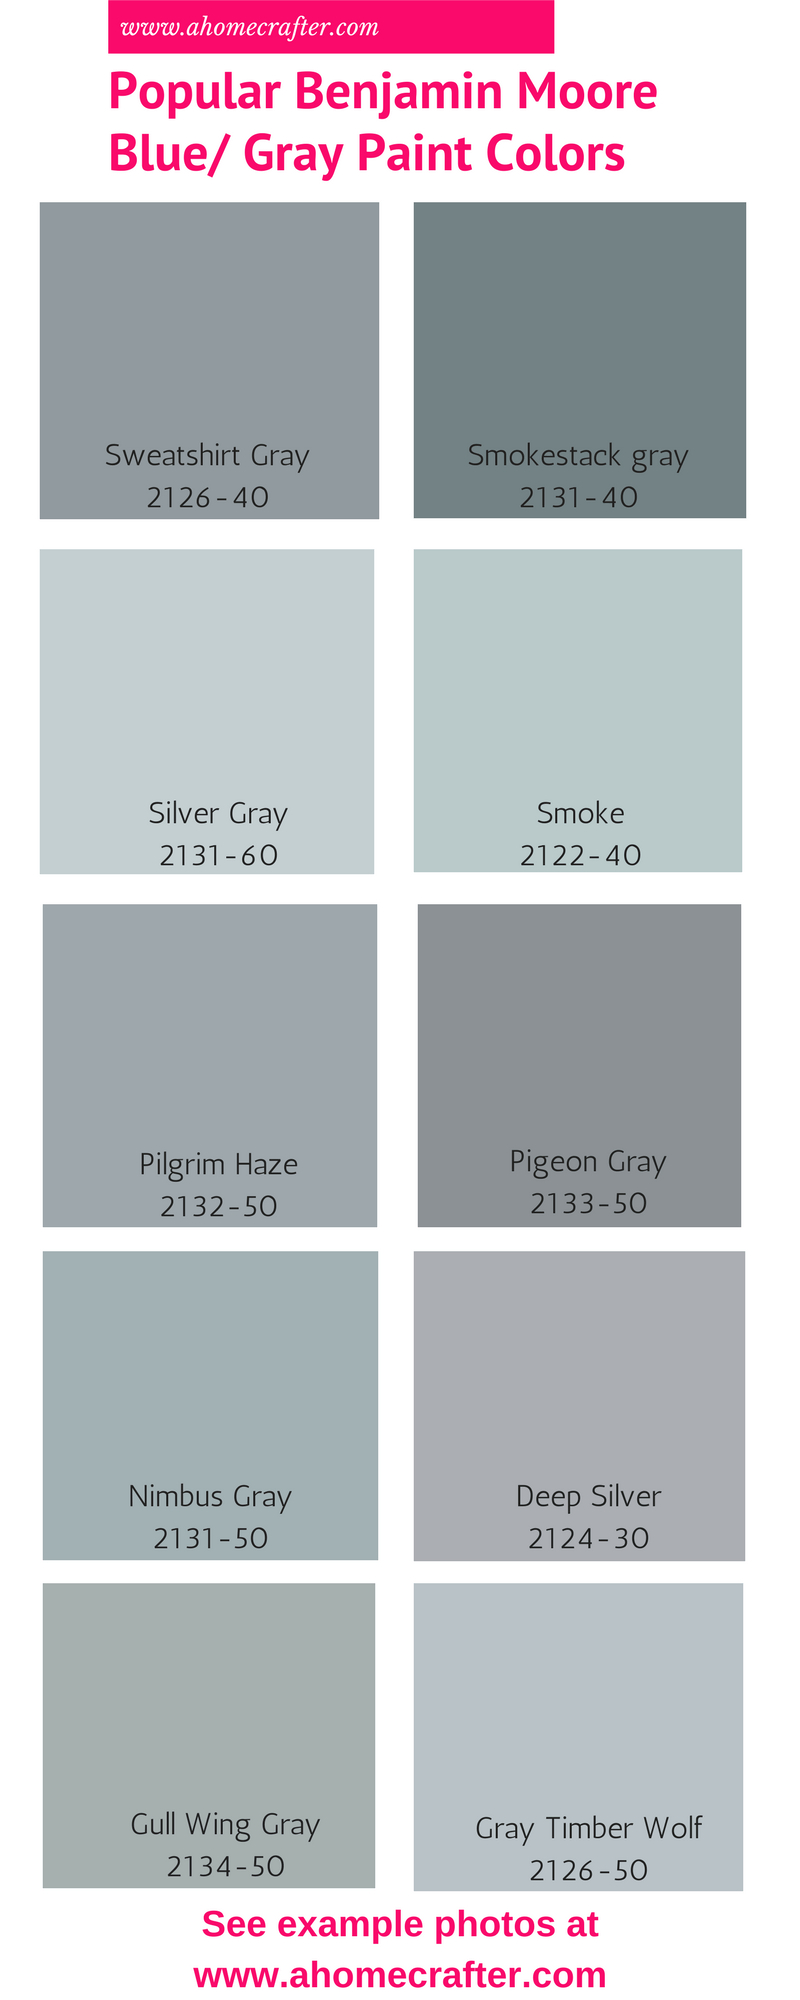 Popular Benjamin Moore Bluegray Paint Colors My Home throughout dimensions 800 X 2000